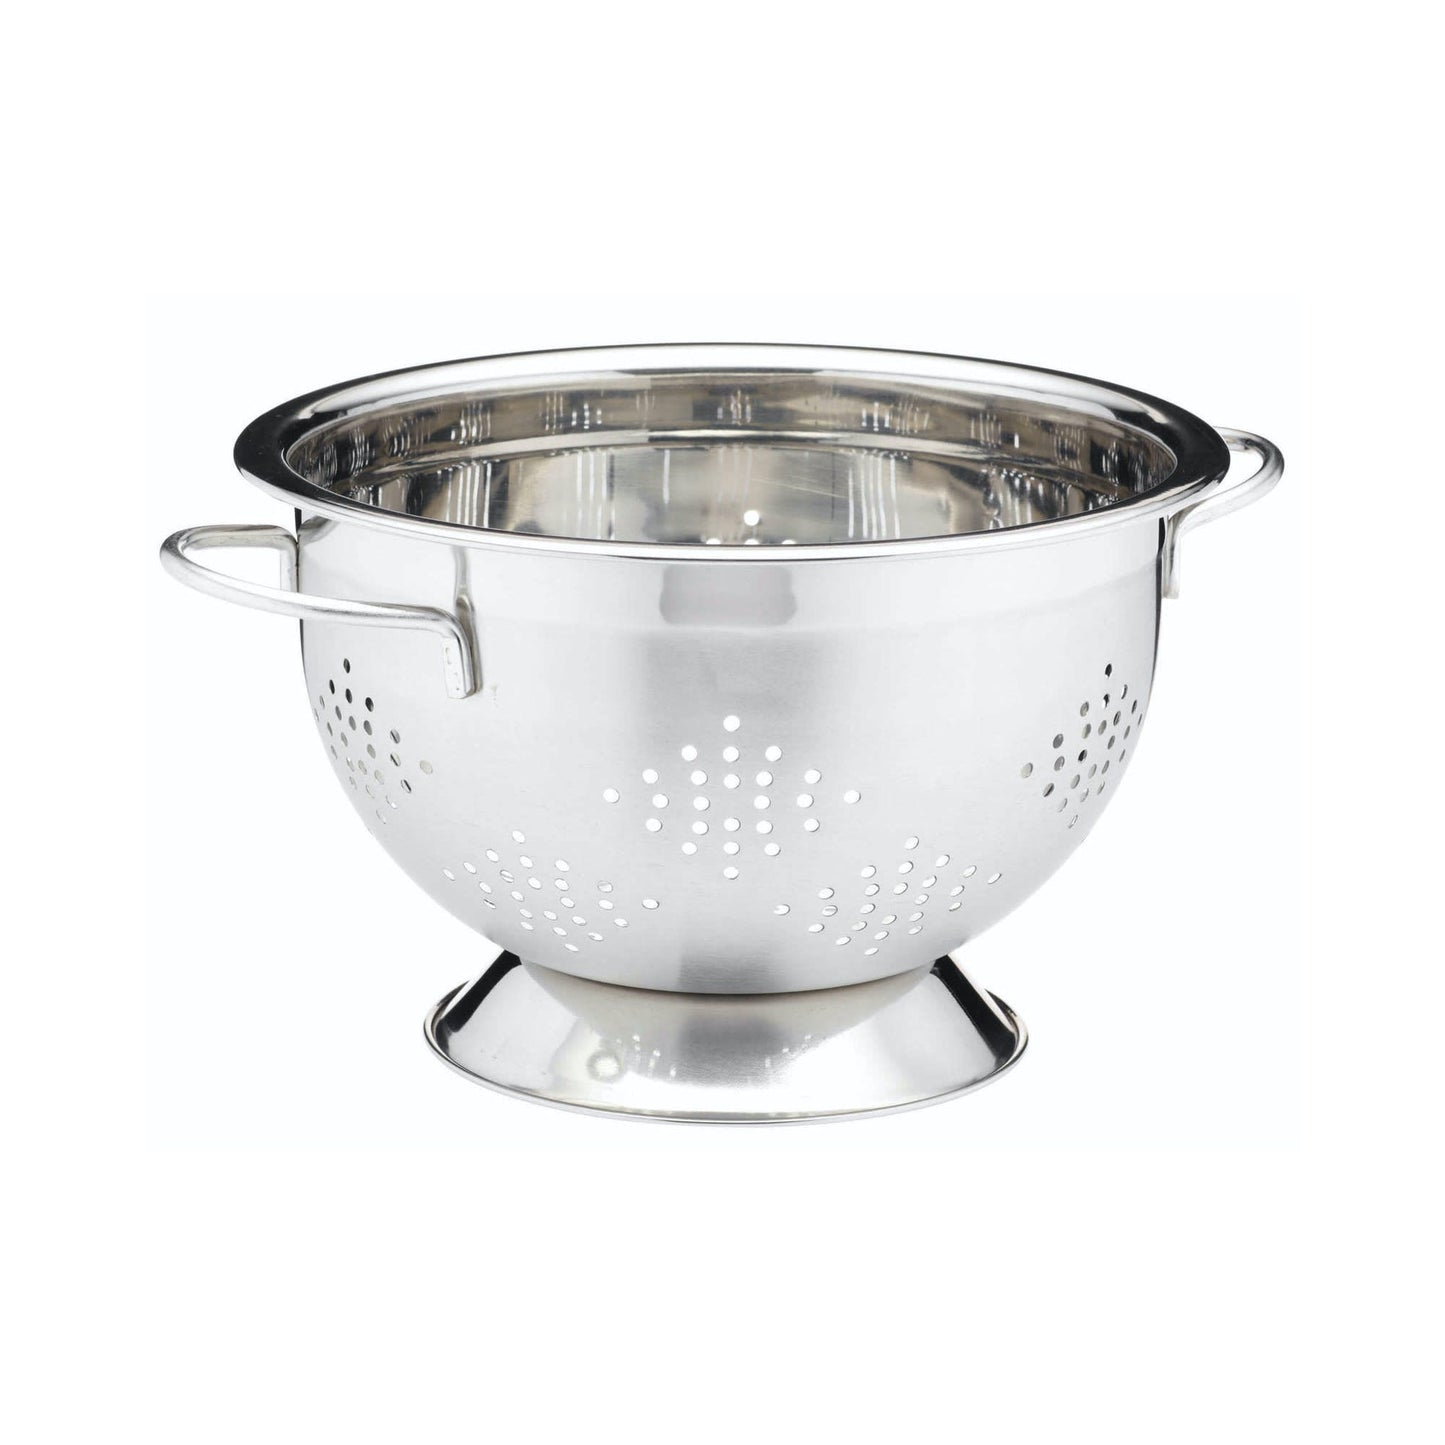 Deluxe Two Handled Colander